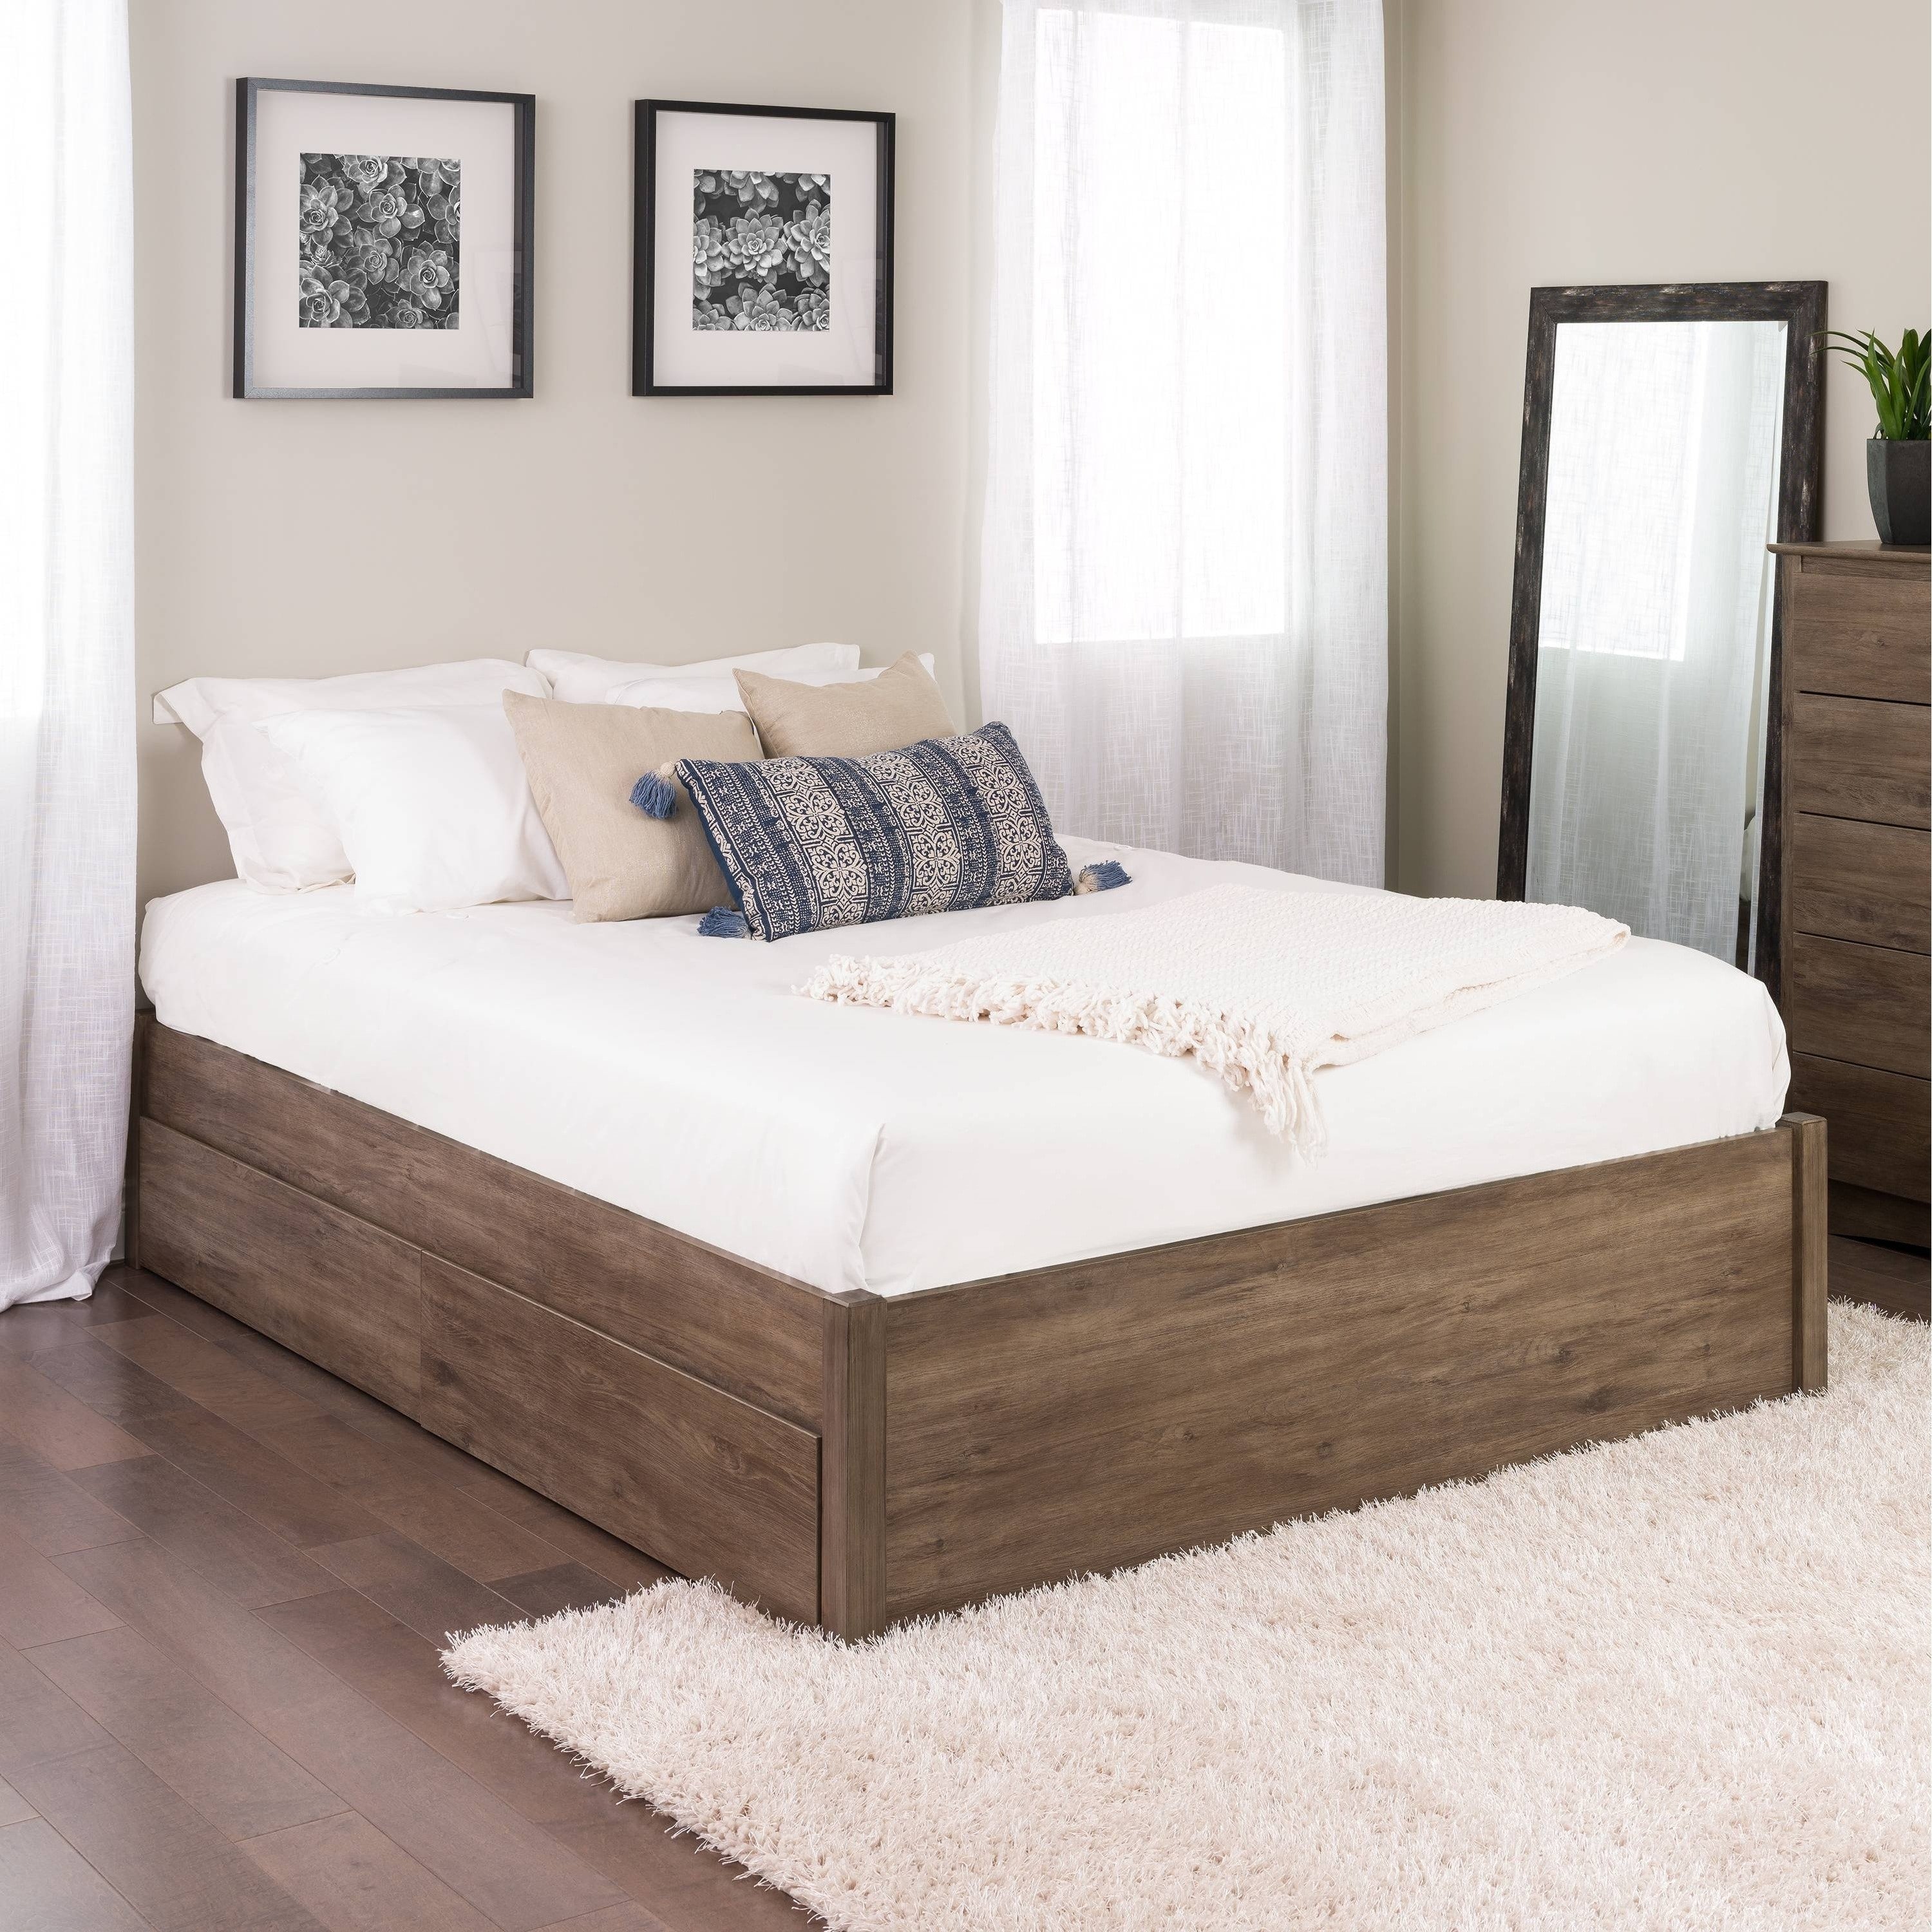 Cheap Bedroom Set with Mattress Unique Prepac Queen Select 4 Post Platform Bed with Optional Drawers